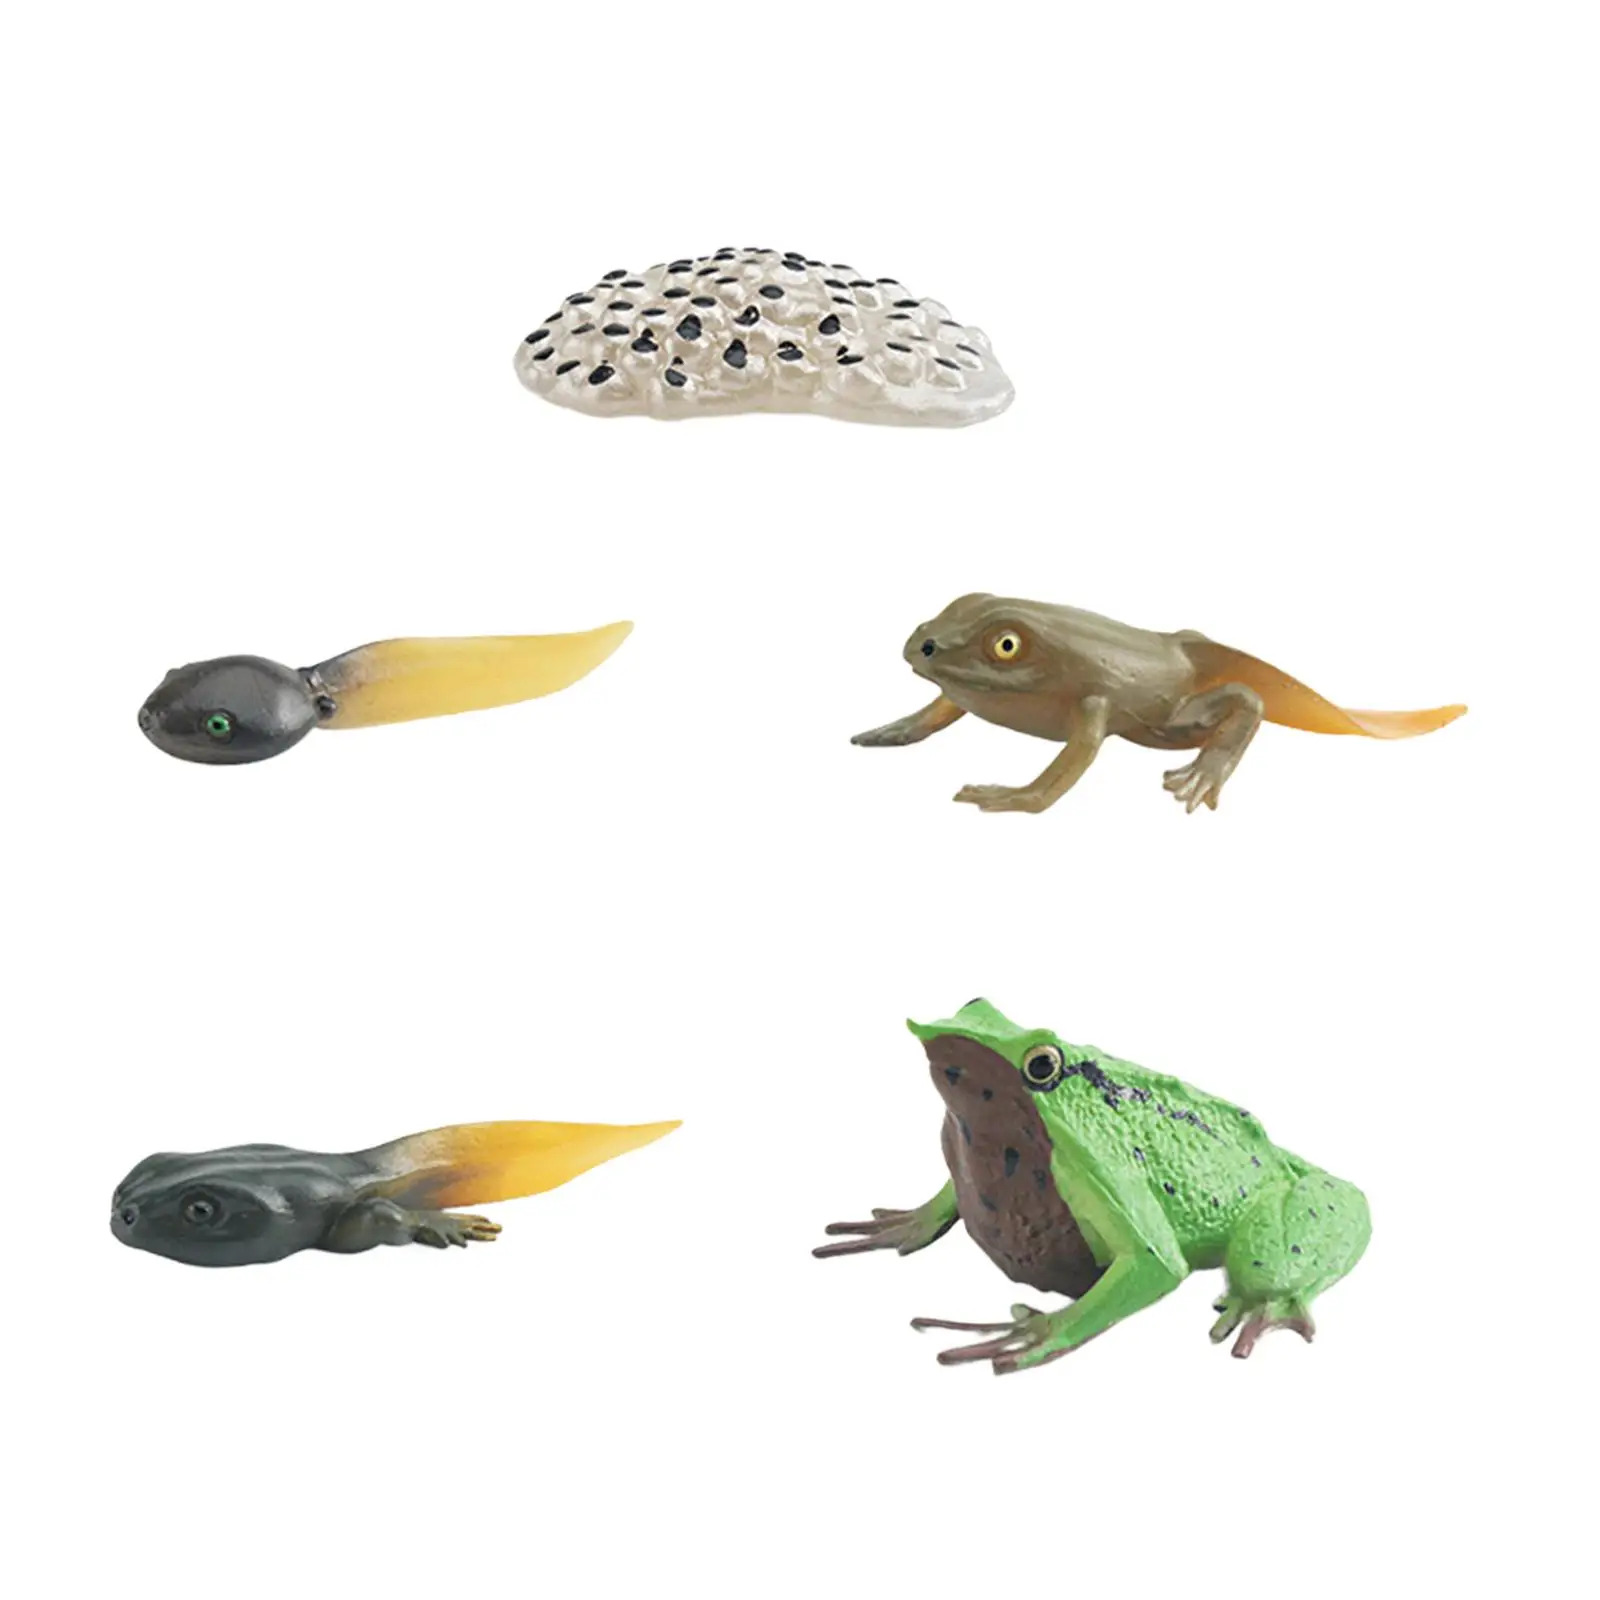 Life Cycle of Frog Toys Science Teaching Aids Animal Figurines Toy Preschool